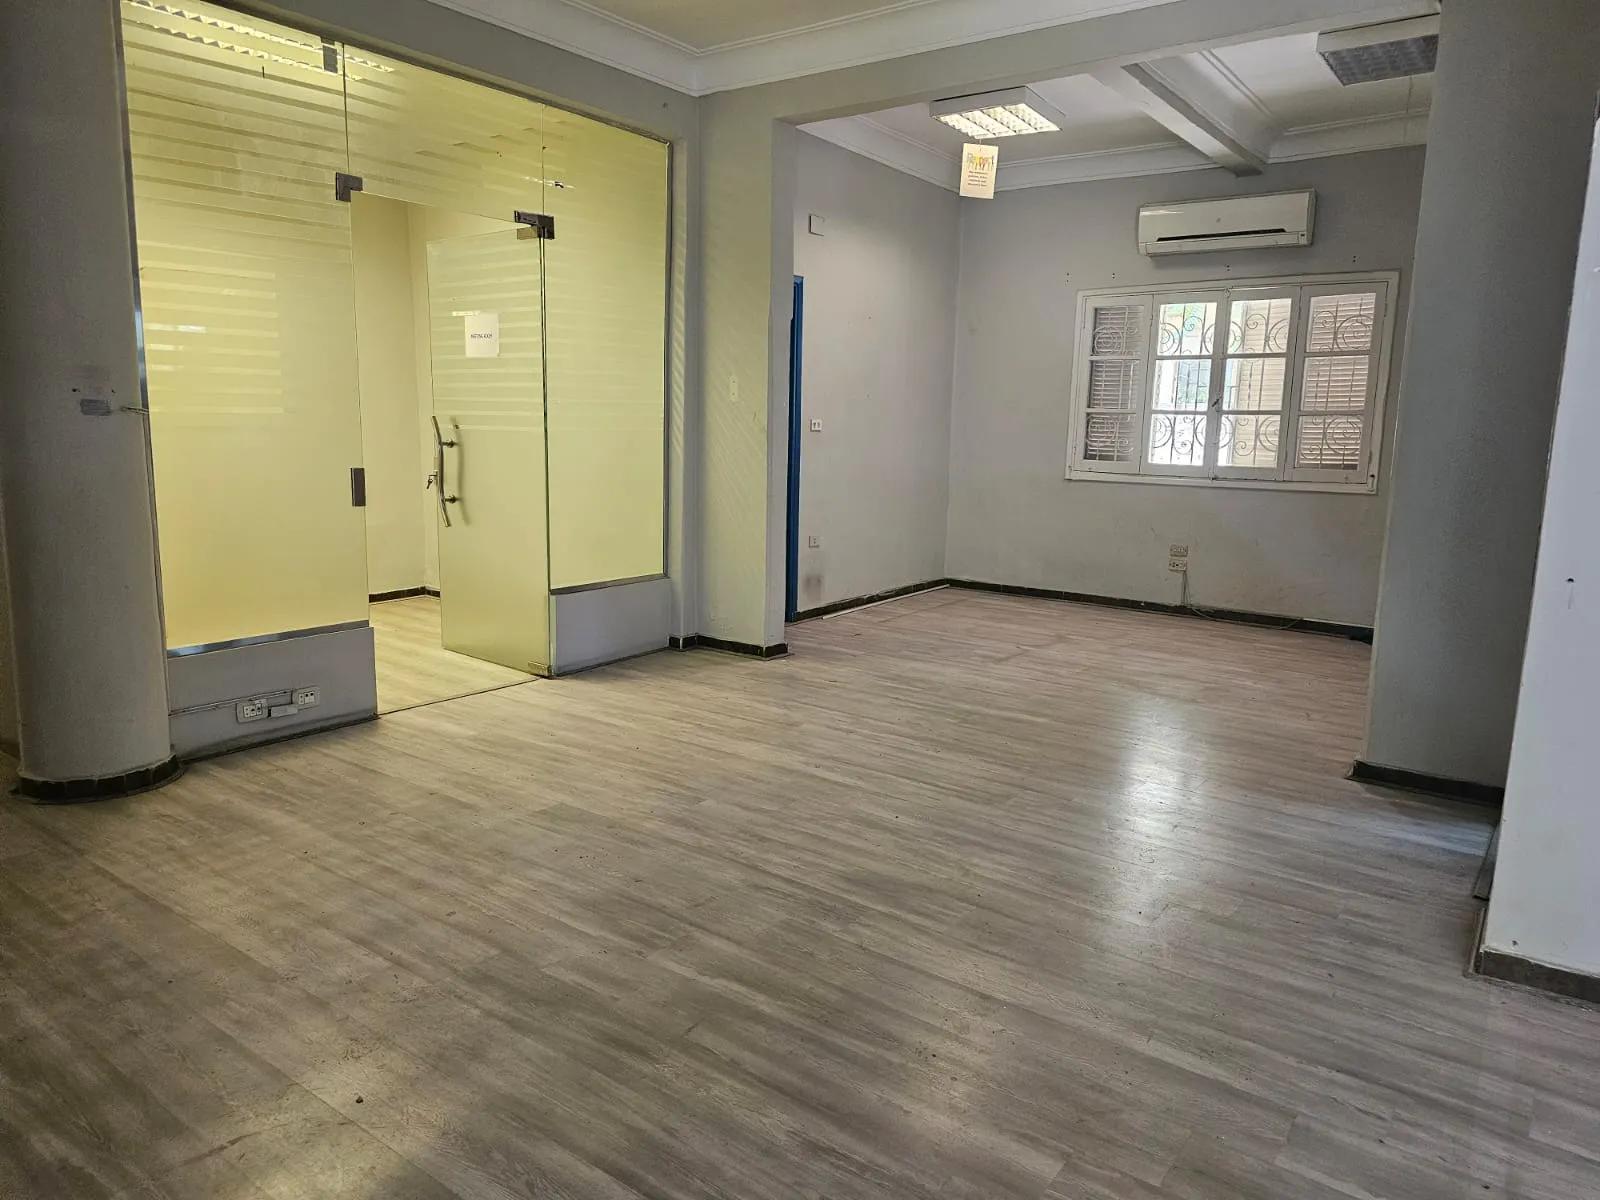 Office spaces For Sale In Maadi Maadi Degla Area: 450 m² consists of 4 Bedrooms 3 Bathrooms Semi furnished 5 stars #5886